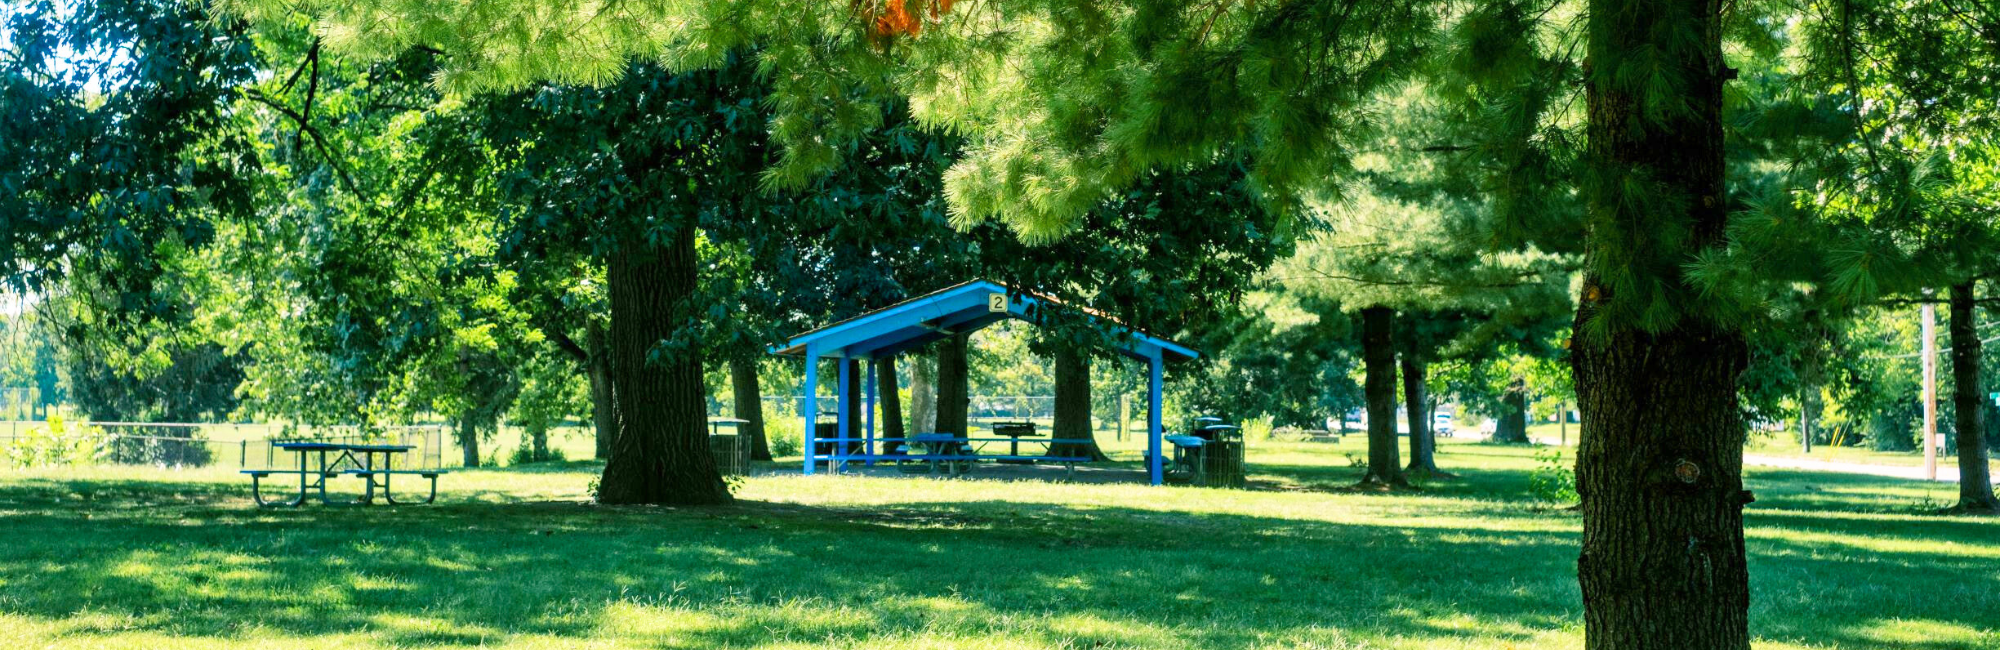 Park with large trees surrounding a picnic shelter